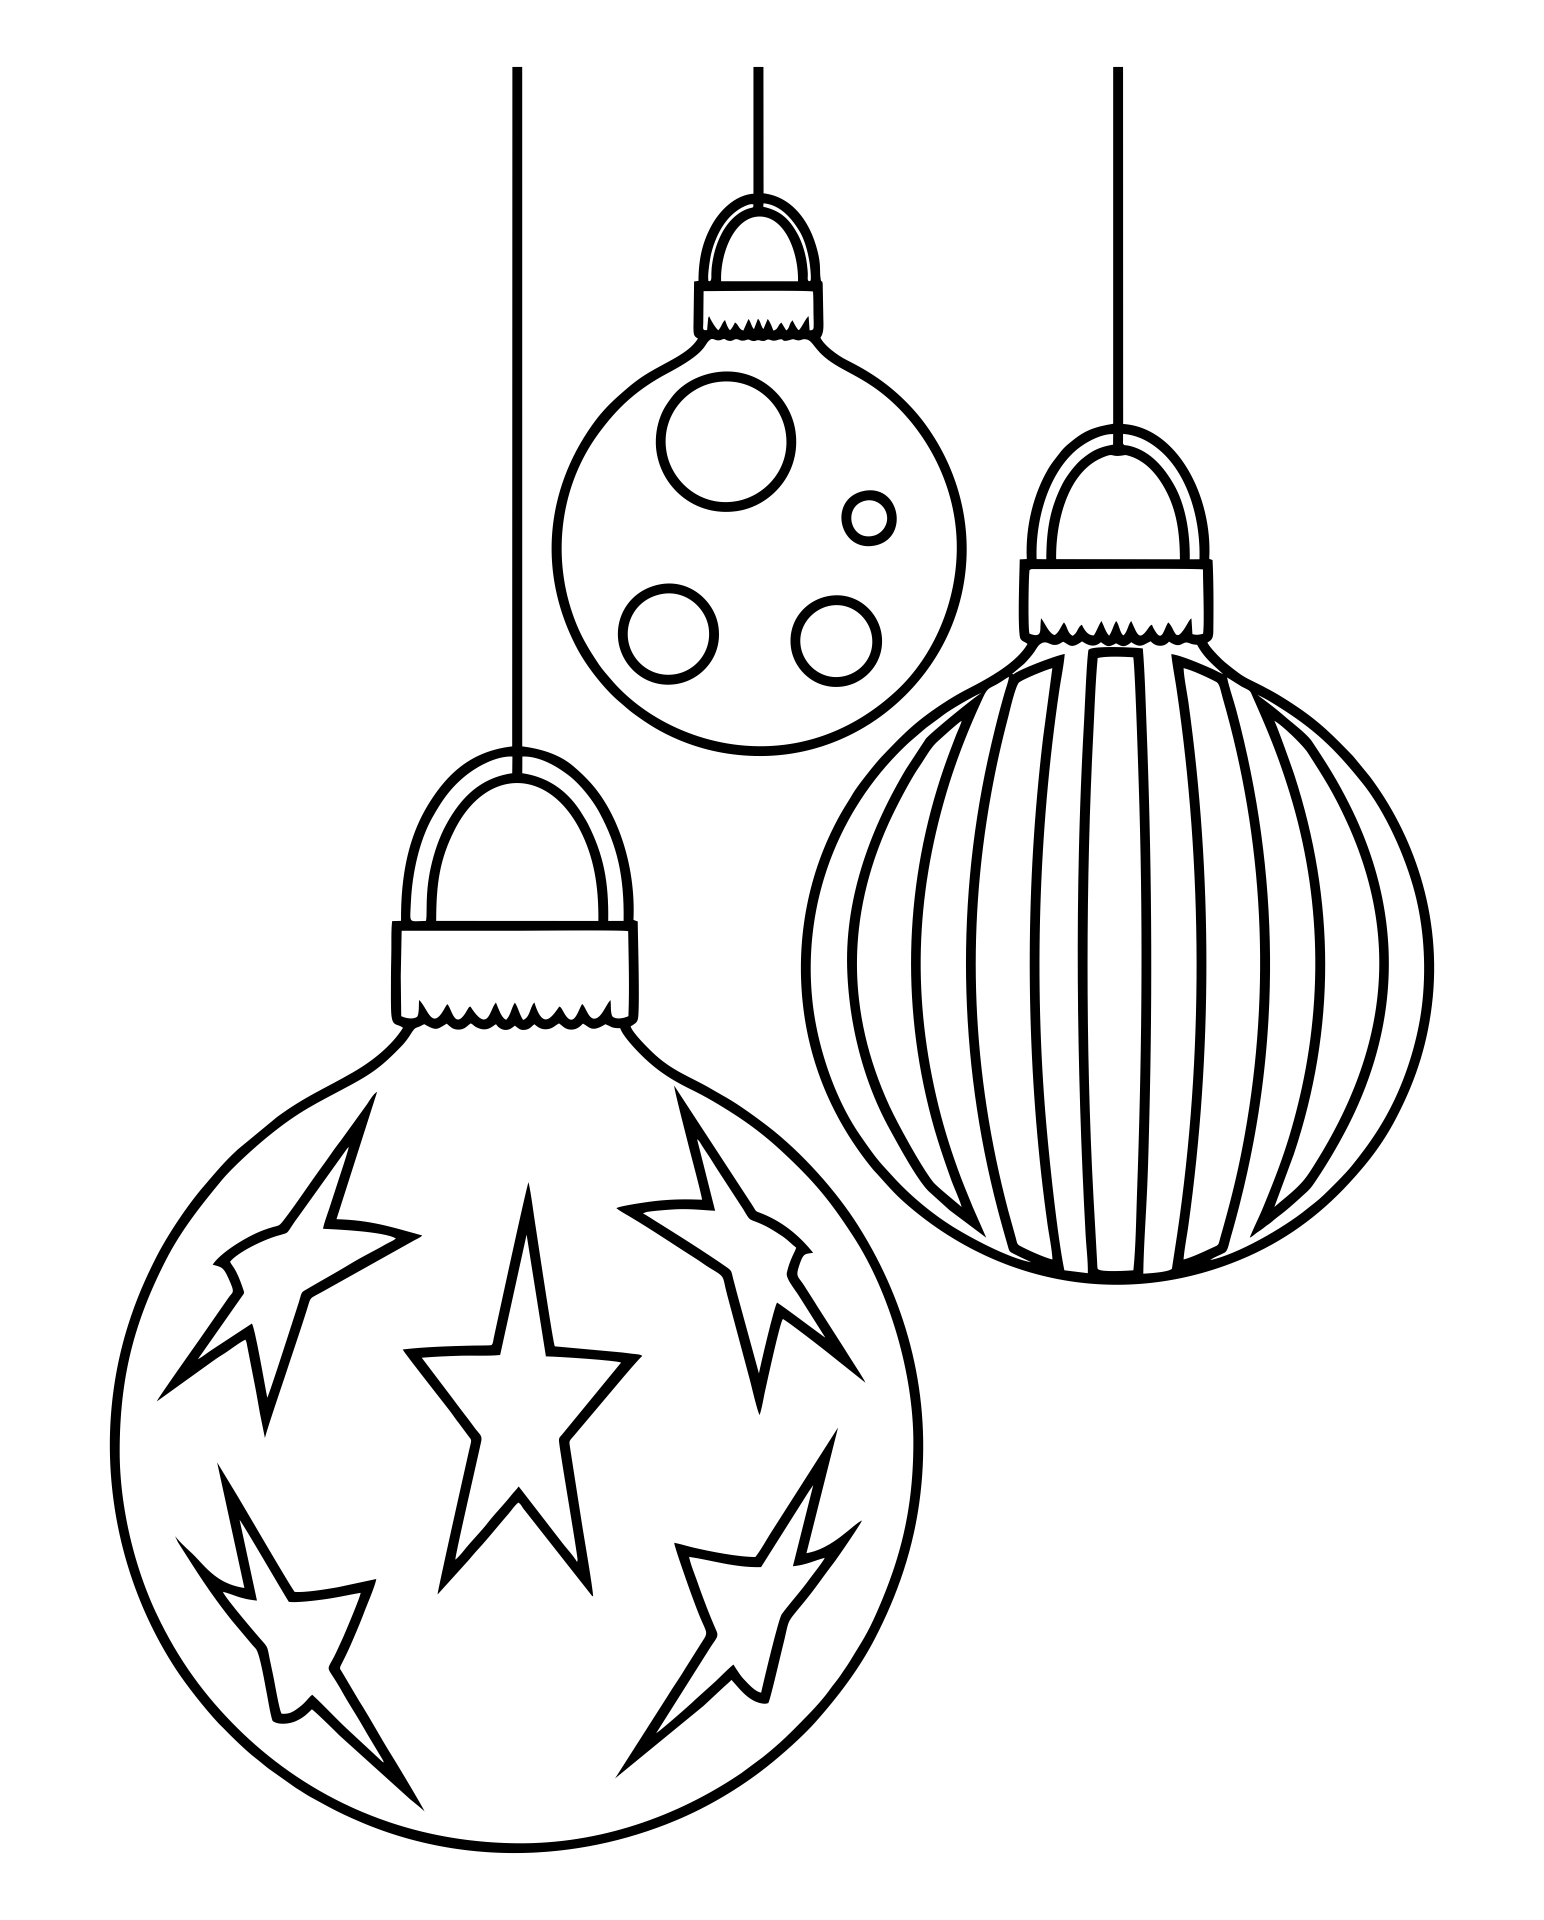 Christmas Cookies Coloring Pages / Cookie Coloring Pages Playing